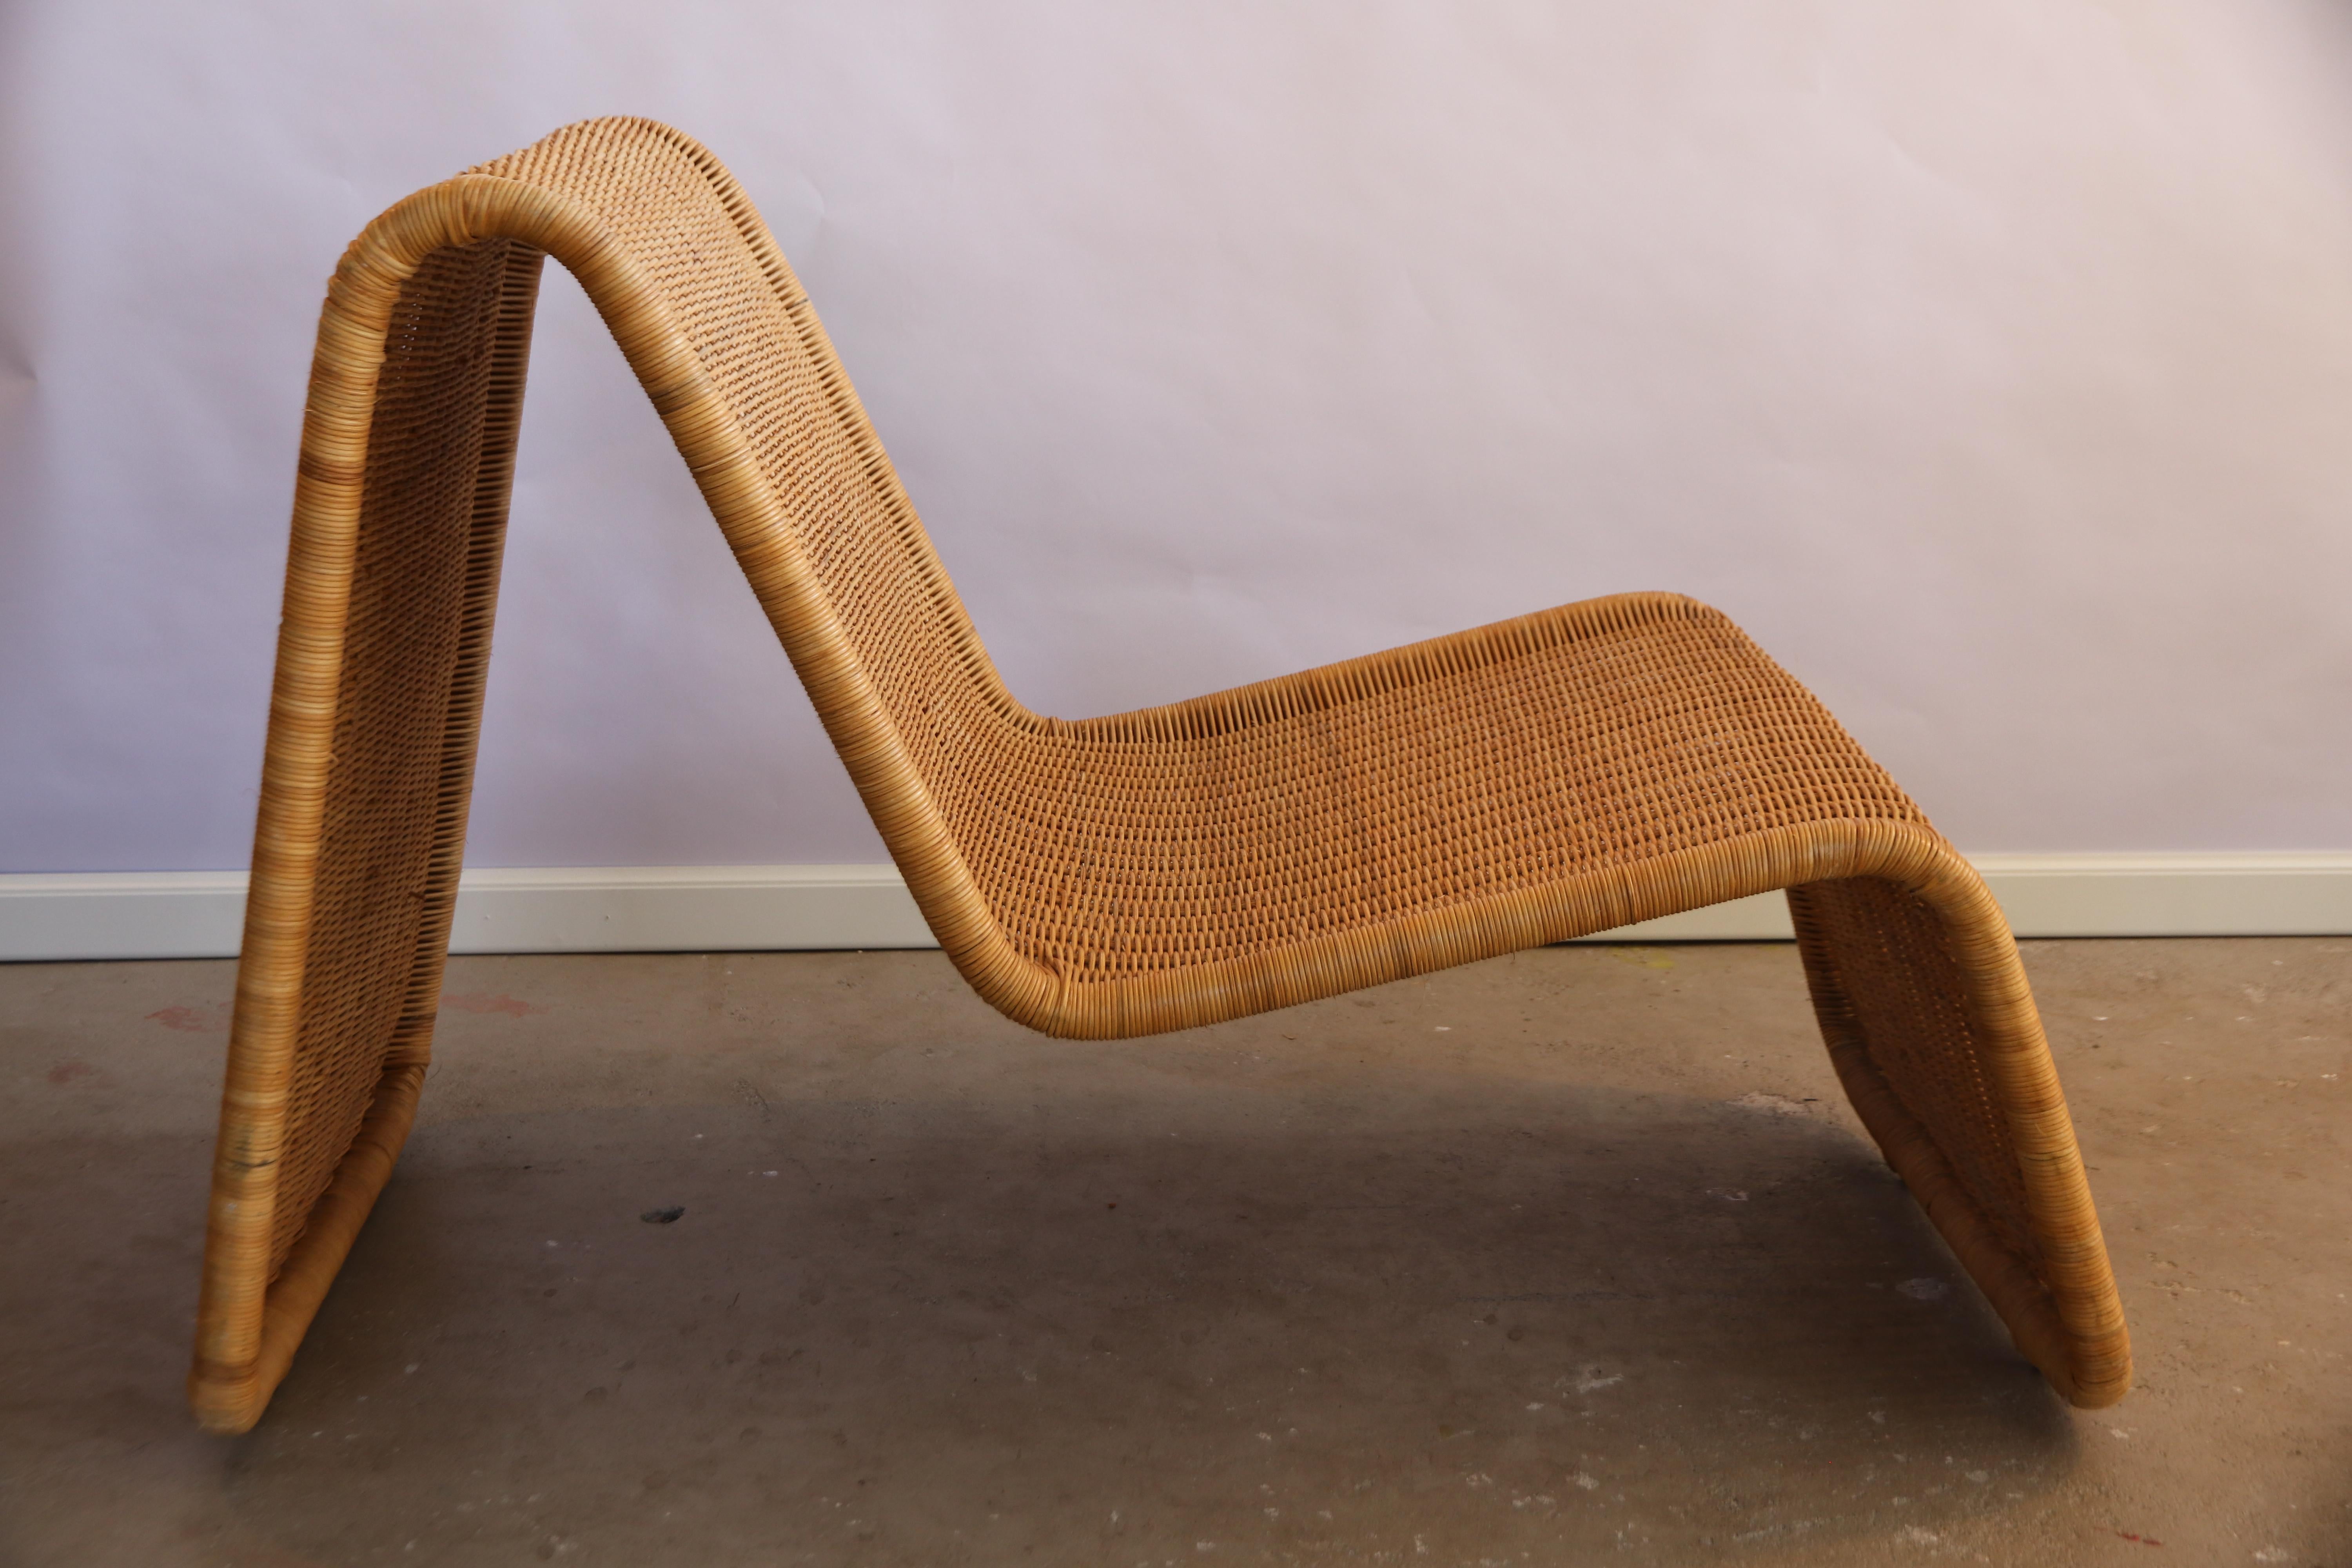 Beautiful low lounge chair for inside and outside use around the swimming pool for instance made of a tubular steel frame wrapped with a natural rattan seat. Beautiful design icon by Tito Agnoli. There are about 5 or 6 identical available.